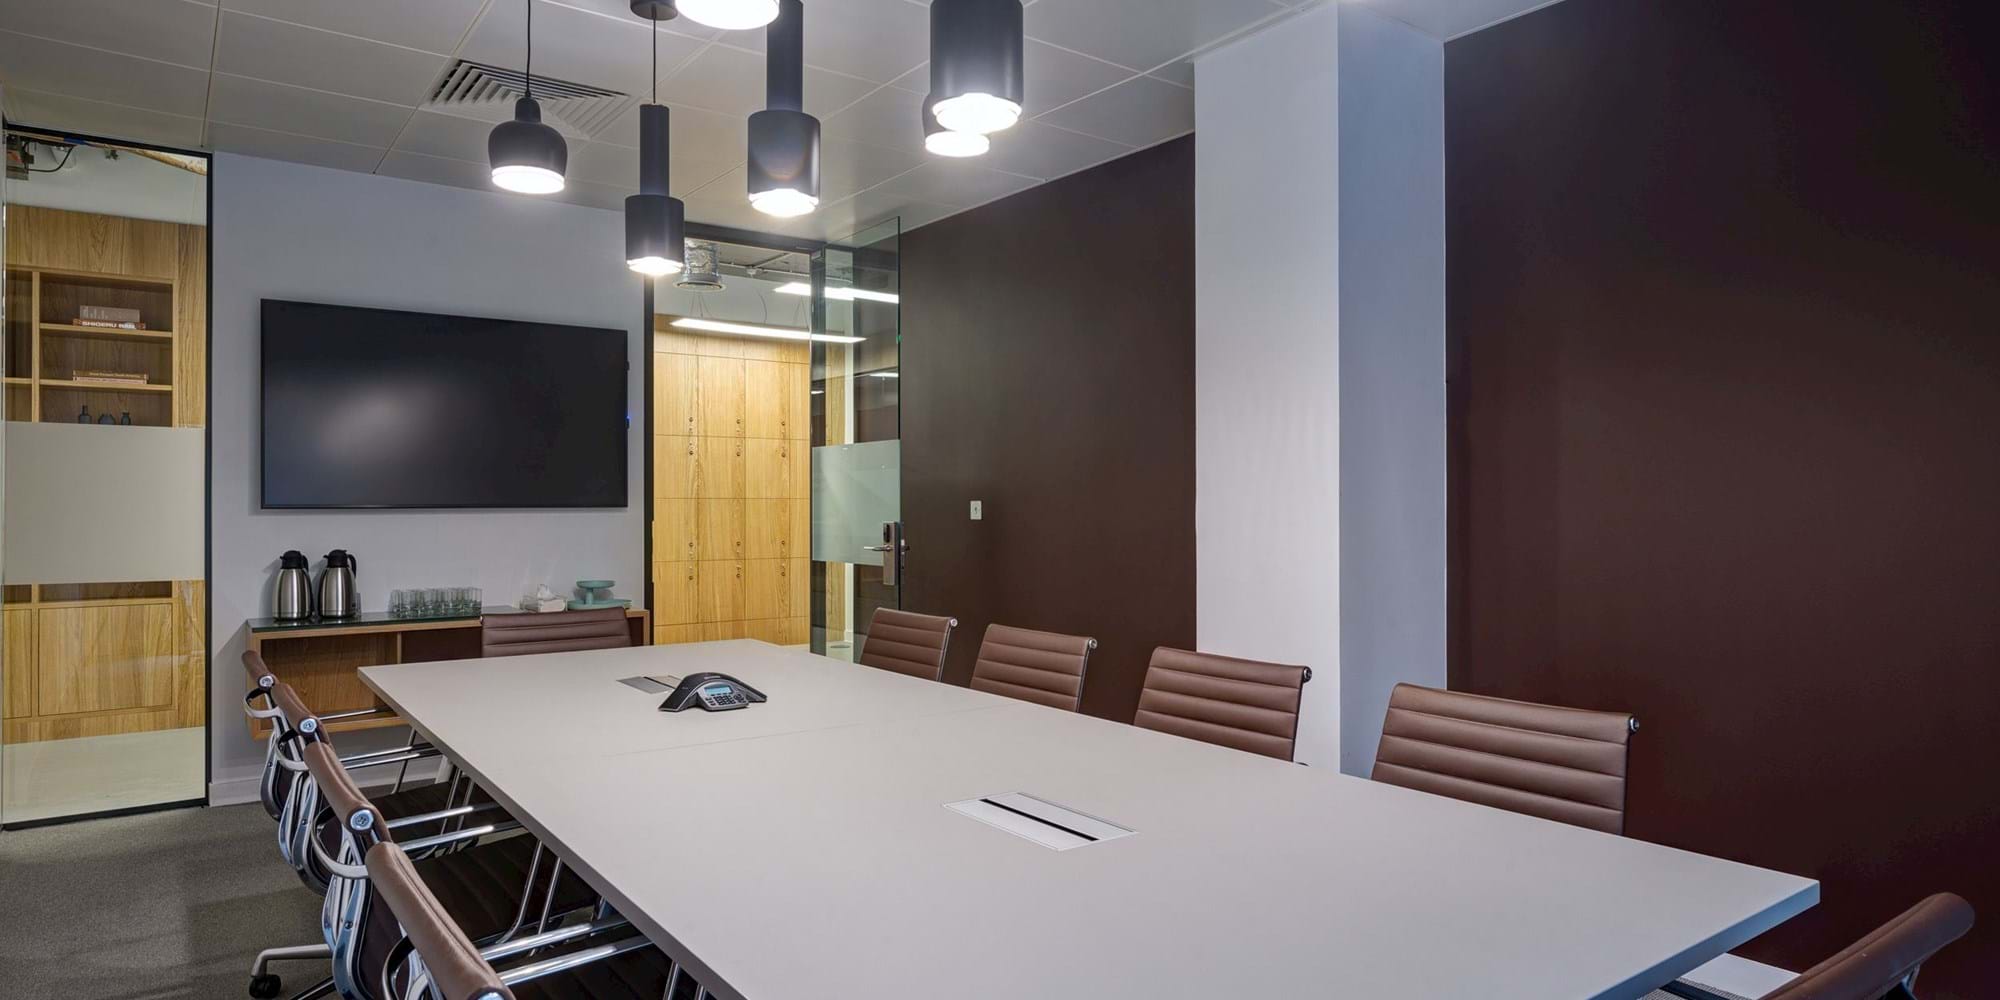 Modus Workspace office design, fit out and refurbishment - Spaces - Brighton - Spaces Brighton 16 highres sRGB.jpg